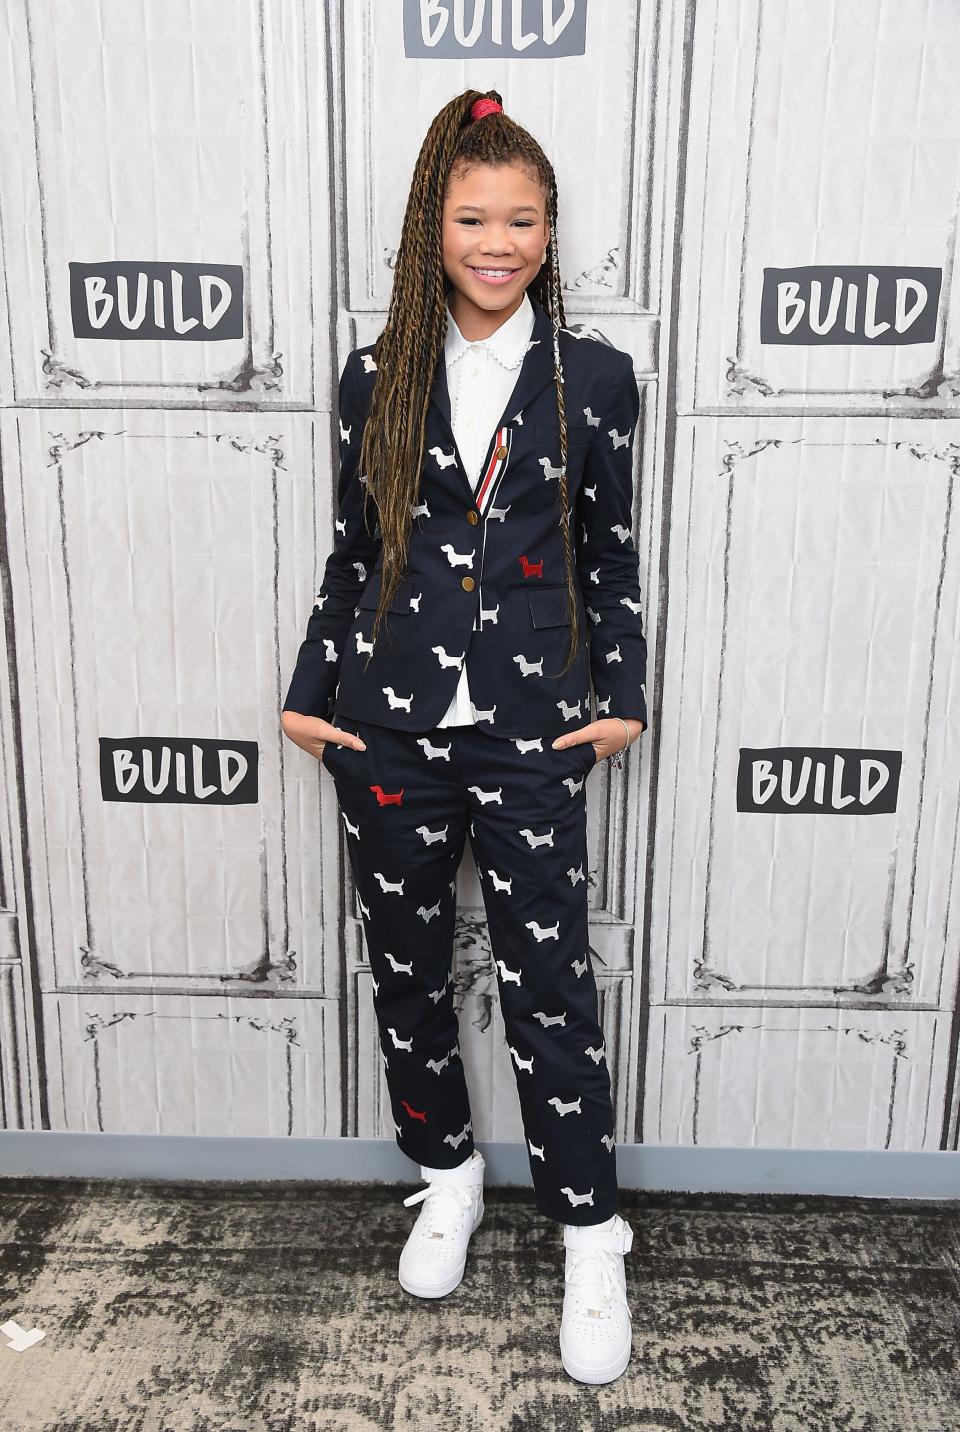 Storm Reid Is the 15-Year-Old Fashion Icon of Our Dreams